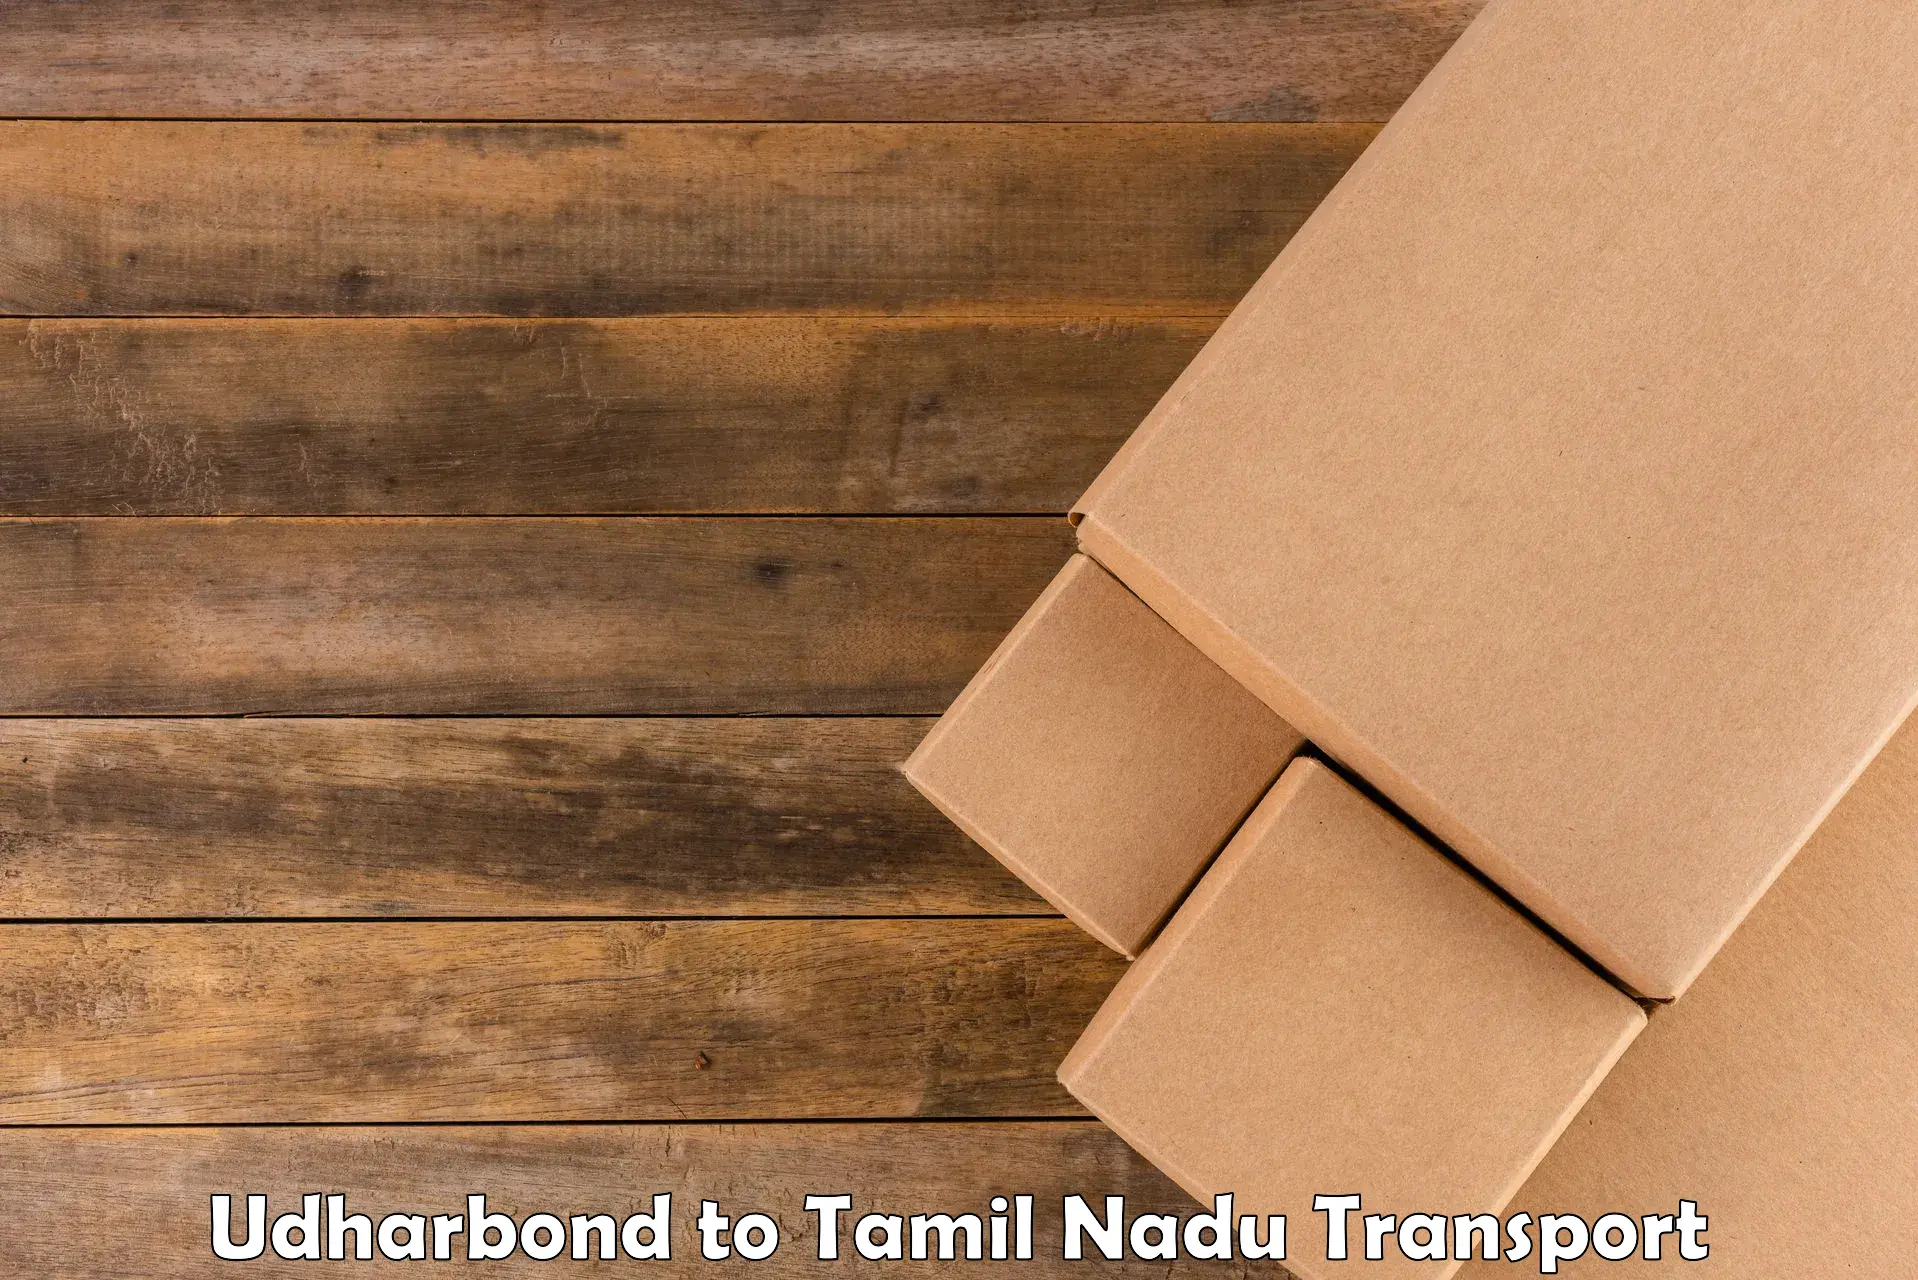 Delivery service Udharbond to Tuticorin Port